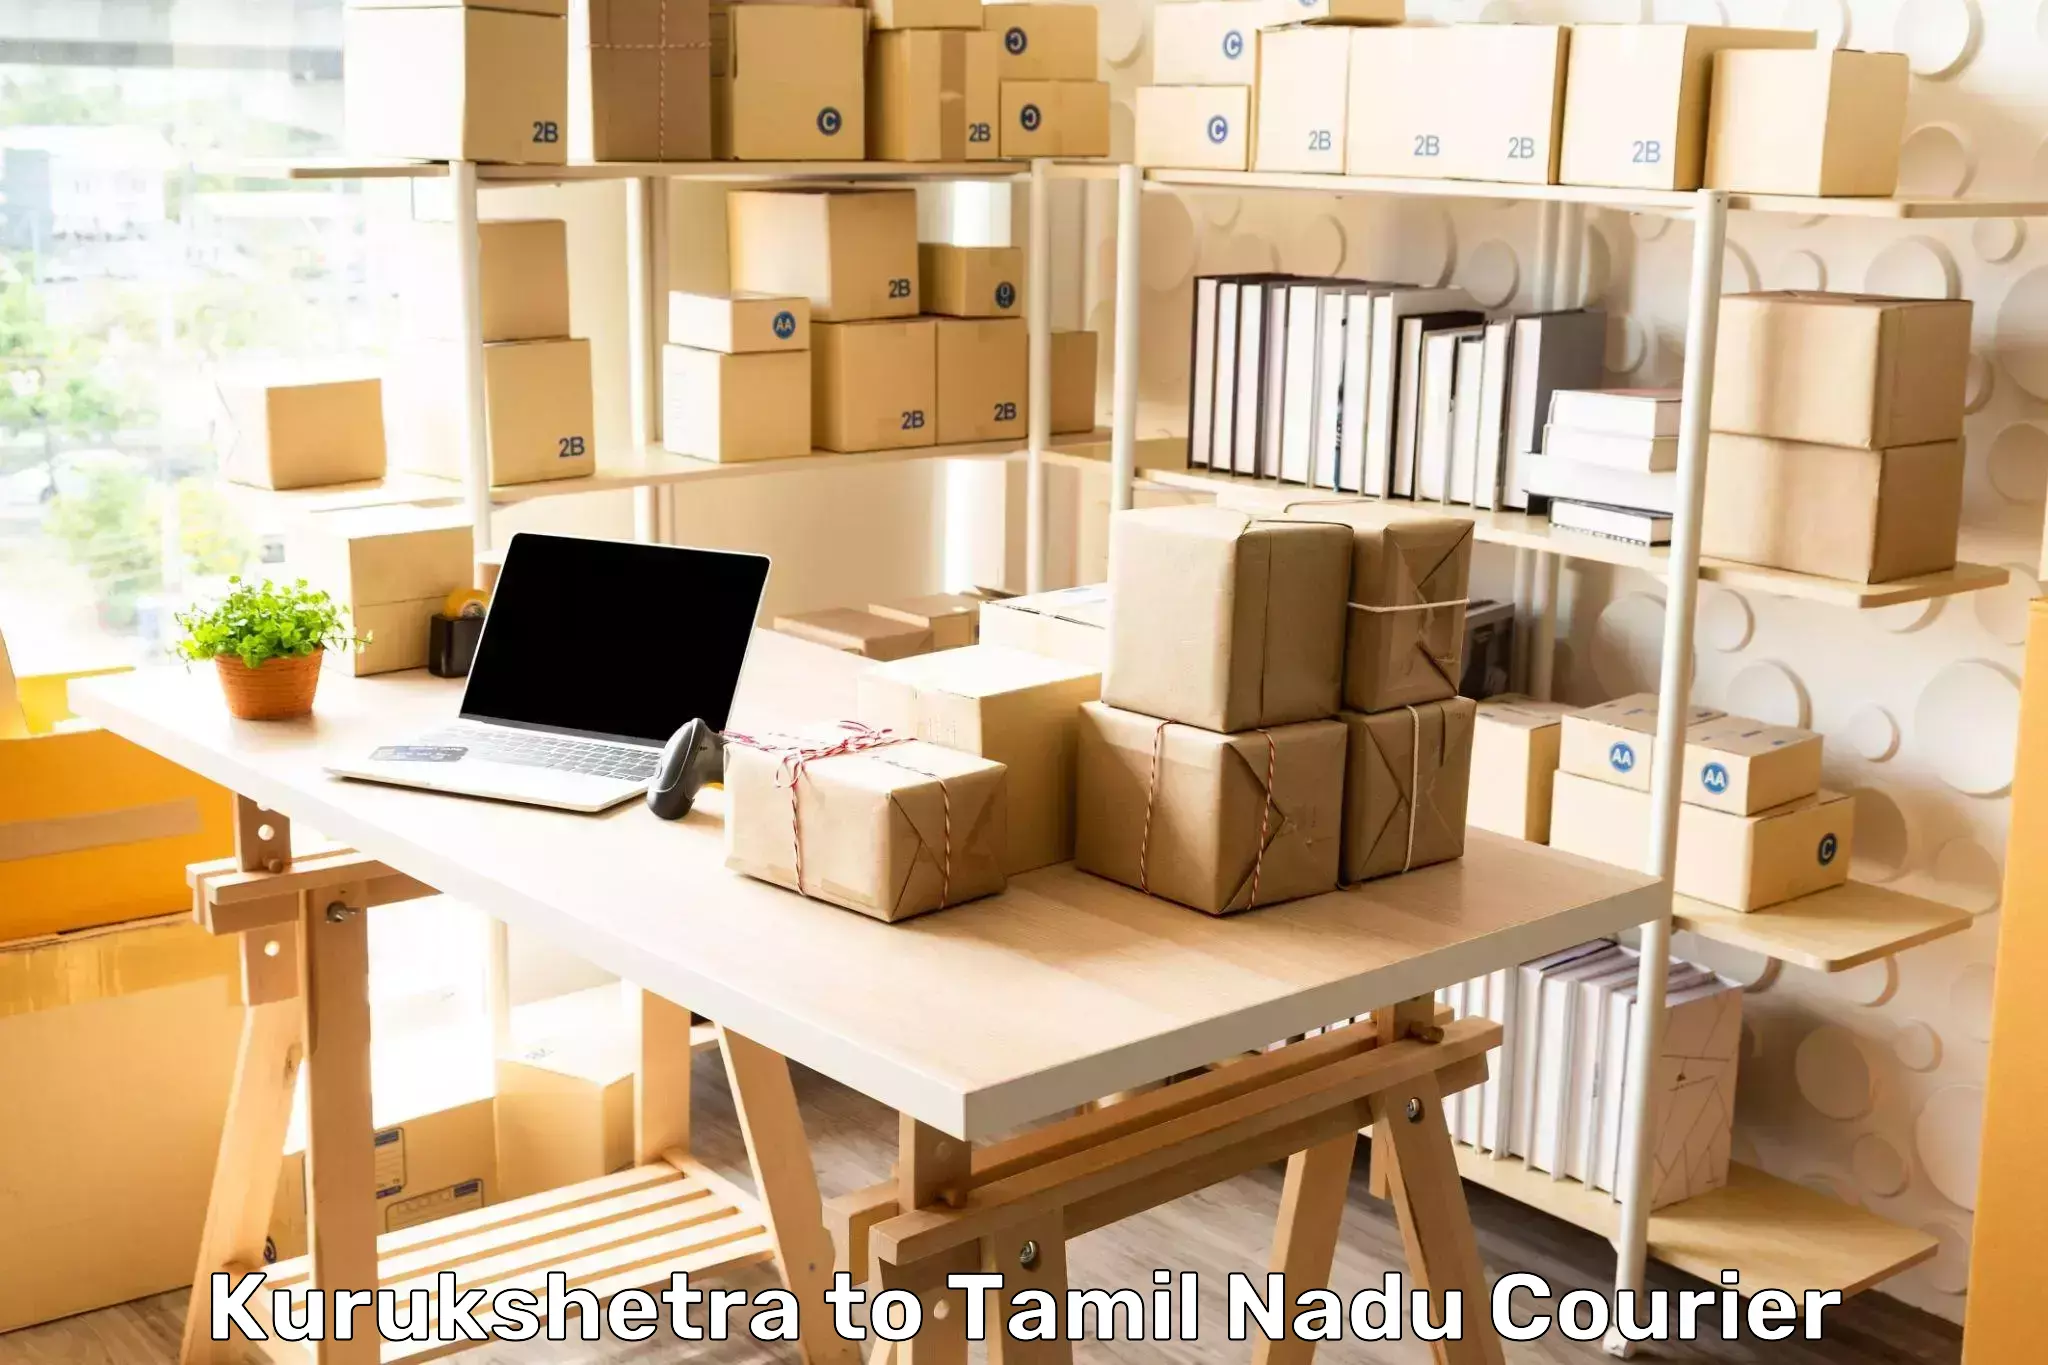 Full-service courier options Kurukshetra to Shanmugha Arts Science Technology and Research Academy Thanjavur